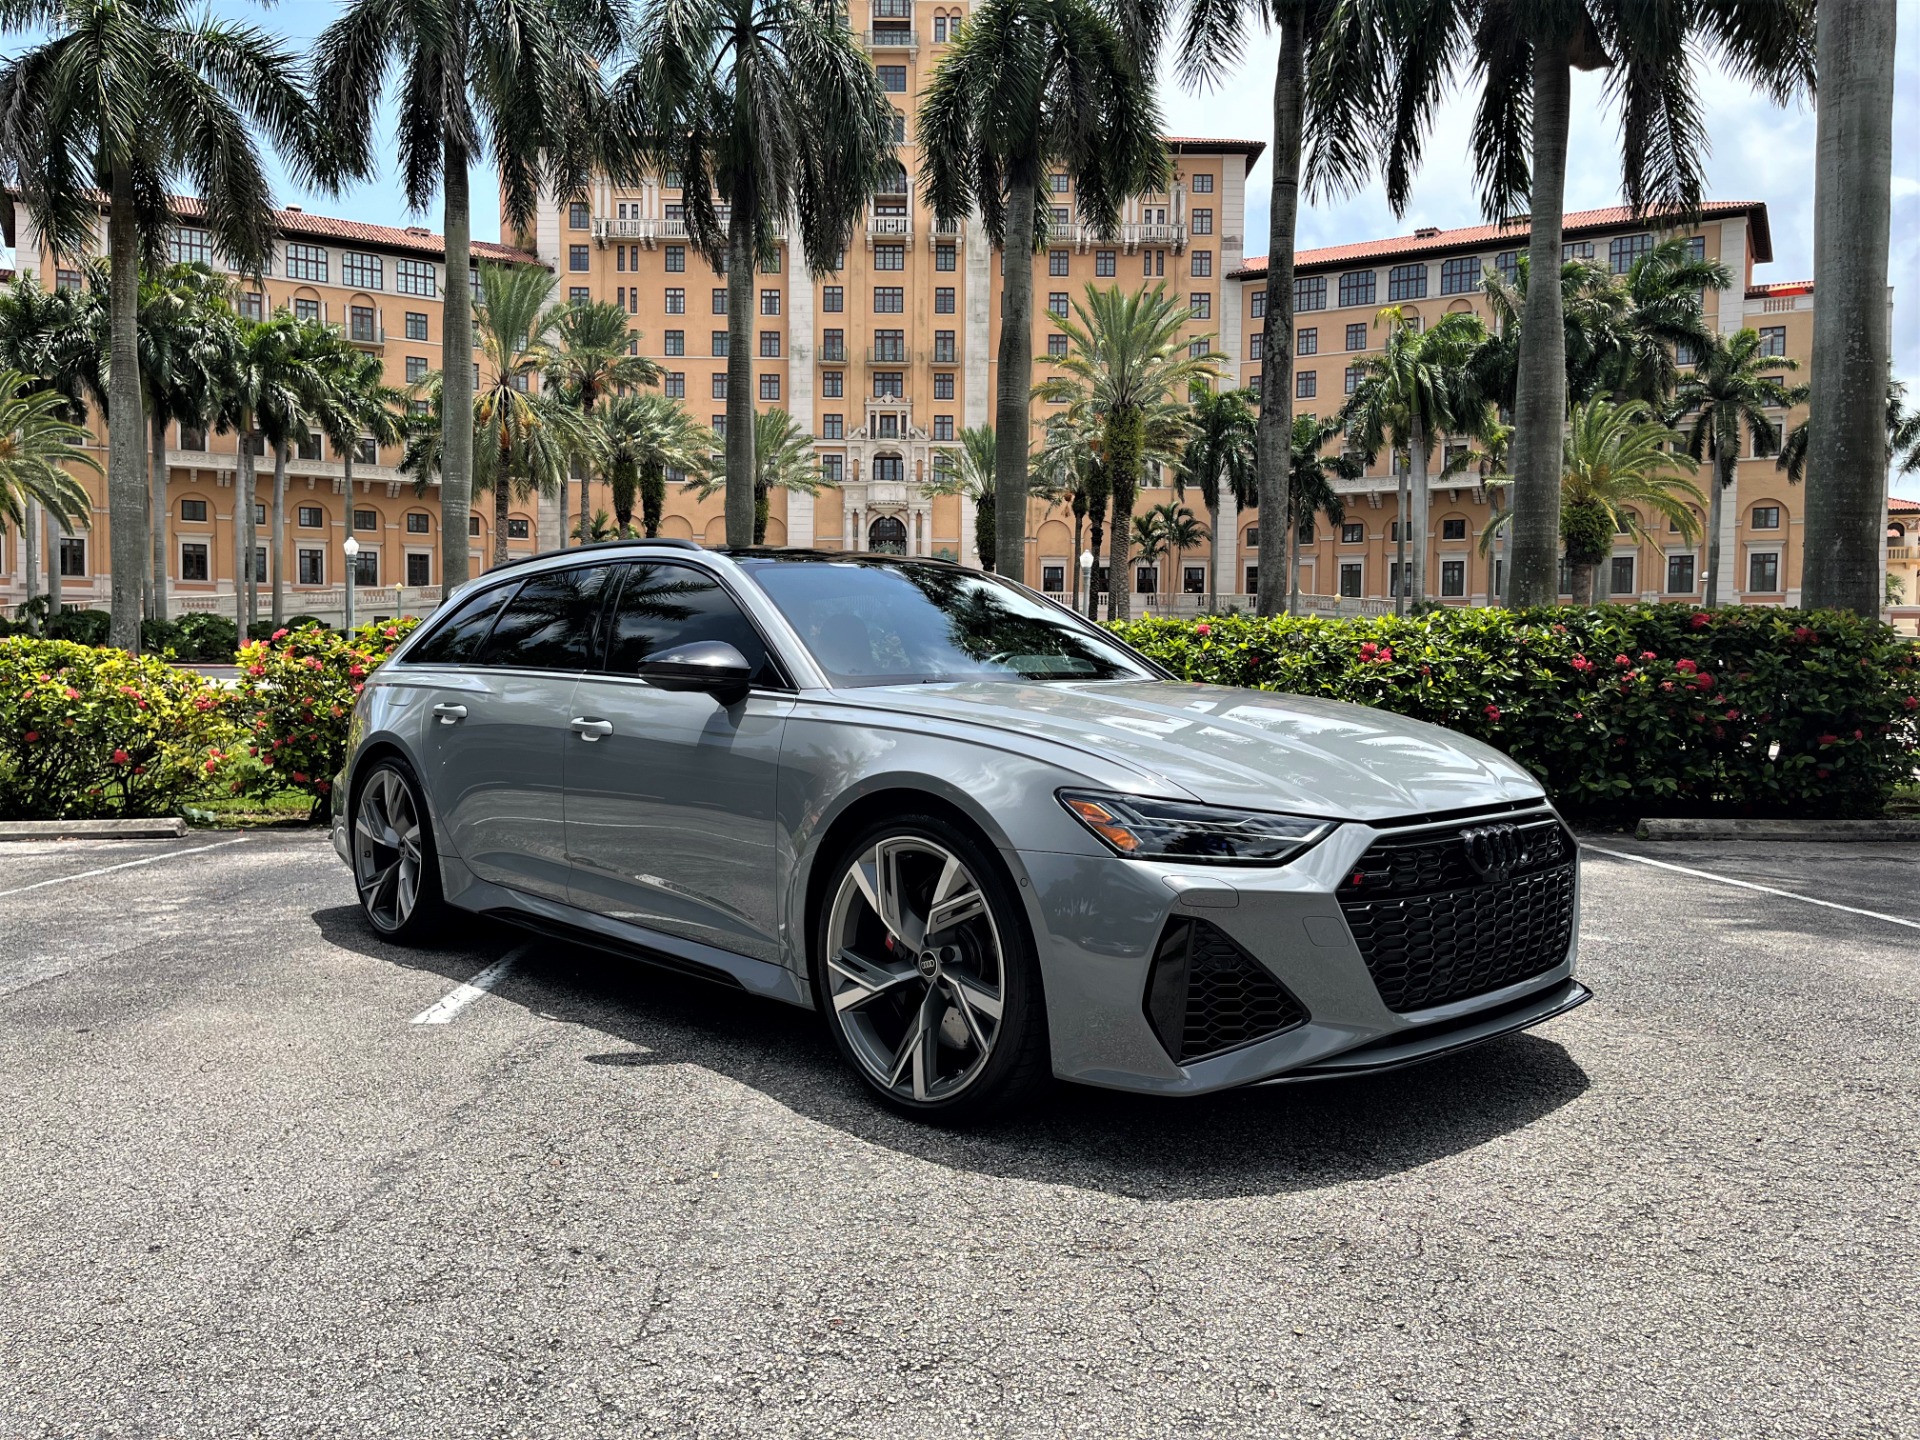 Used 2021 Audi RS 6 Avant 4.0T quattro Avant for sale $129,850 at The Gables Sports Cars in Miami FL 33146 1